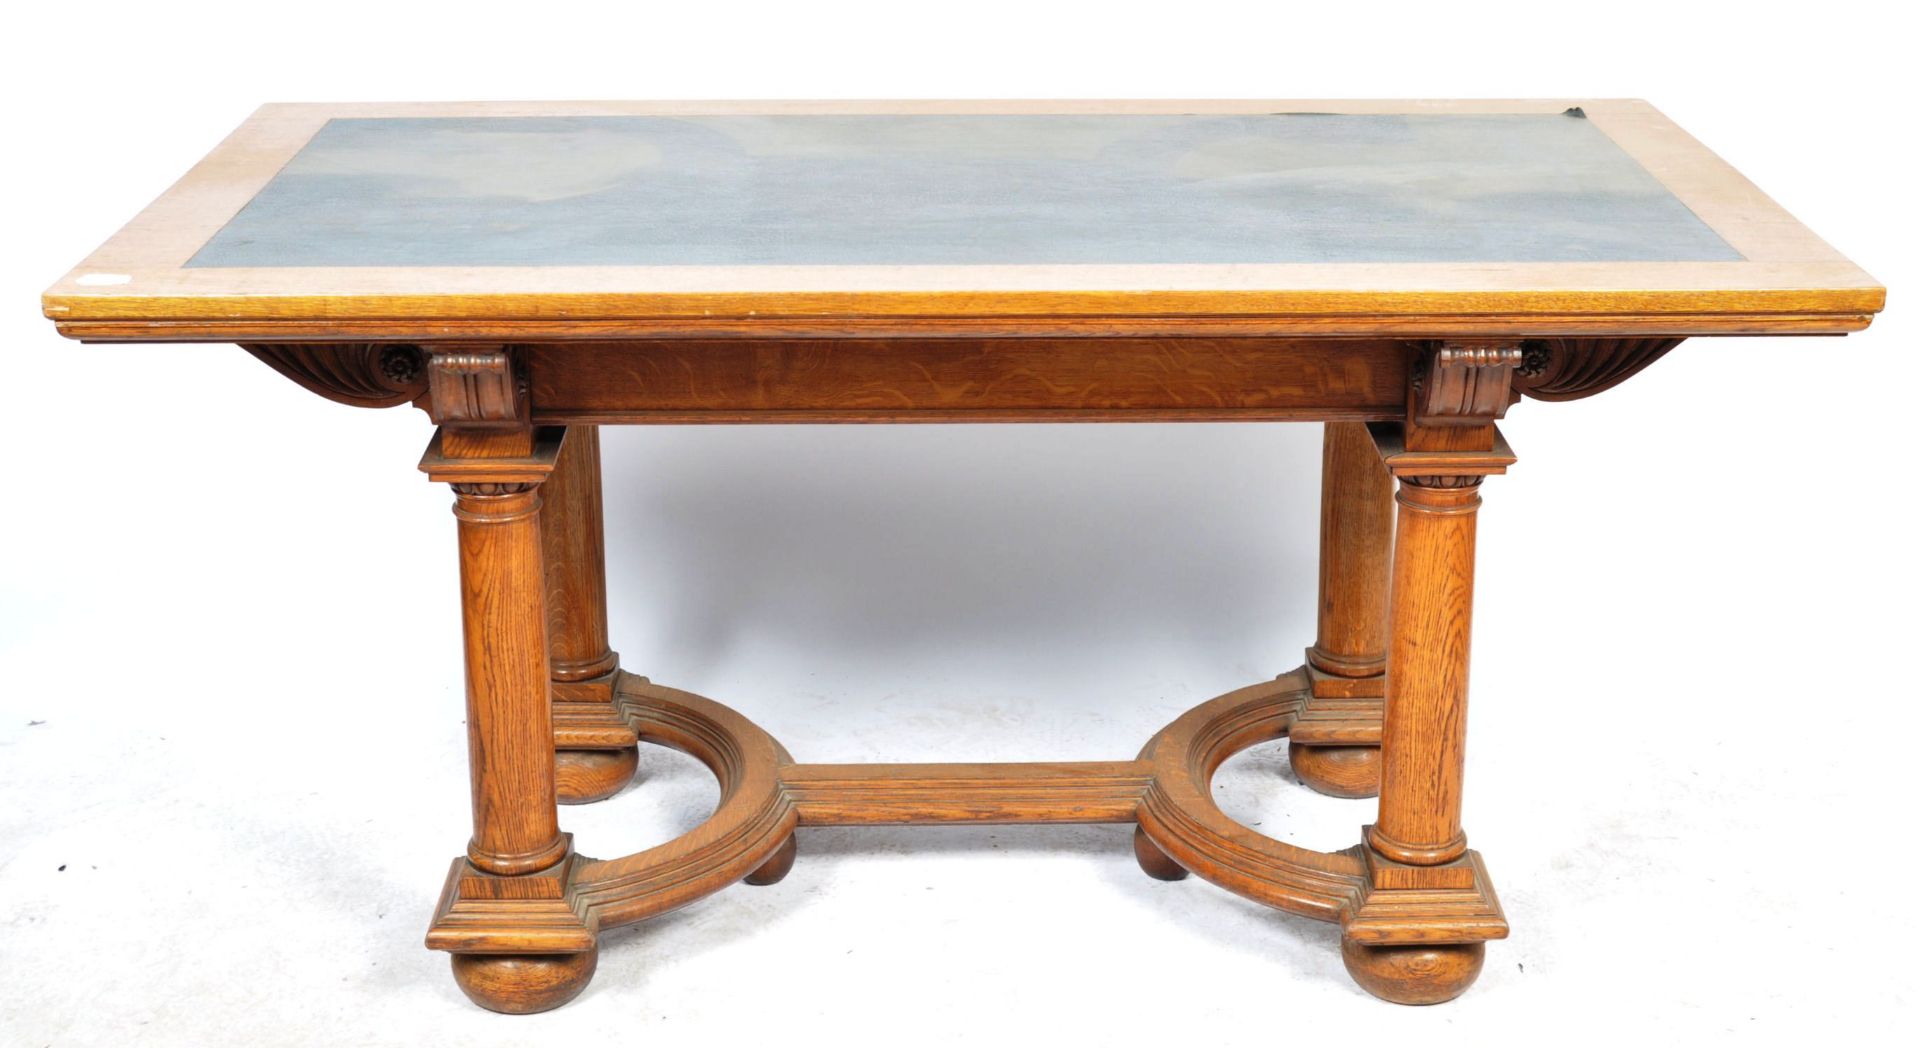 STUNNING 19TH CENTURY GOTHIC OAK DINING TABLE - Image 2 of 8